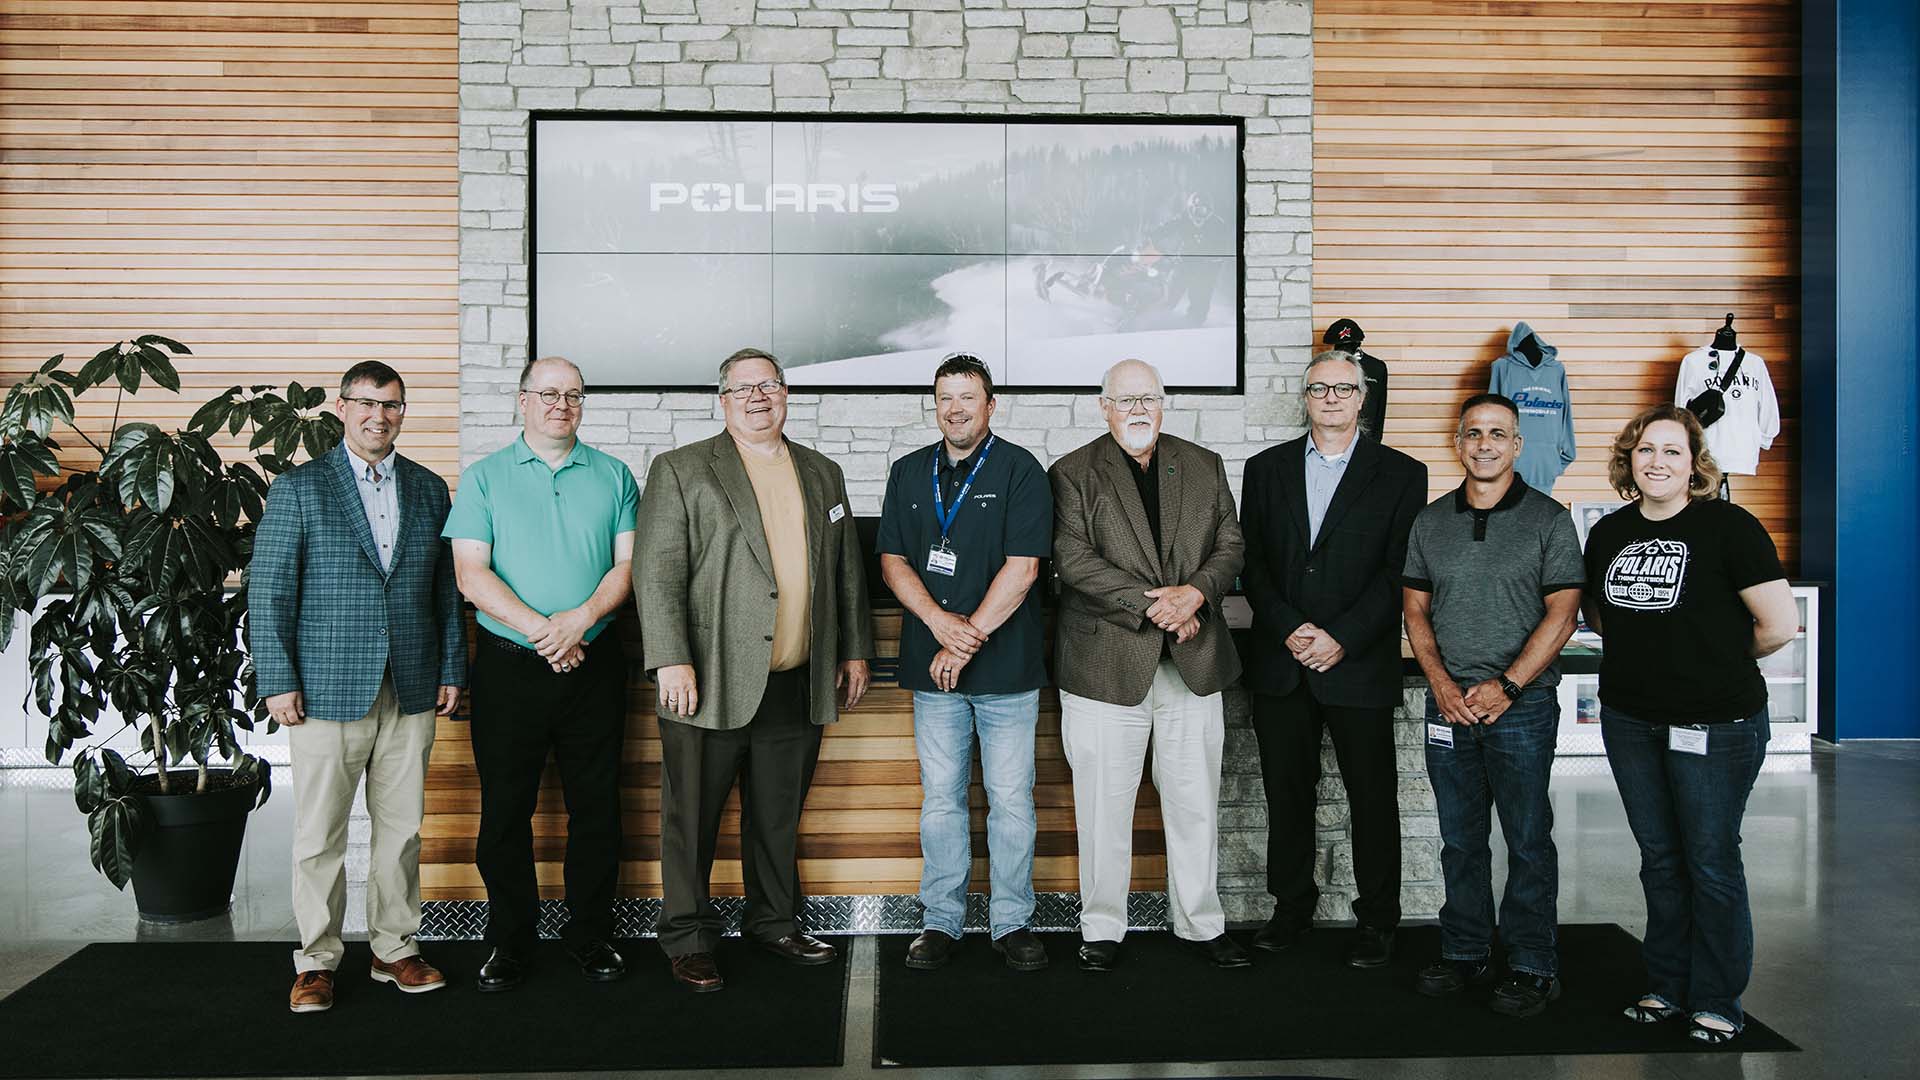 A group of eight people pose in front of a rock and wood wall with a bank of TVs displaying the Polaris logo.